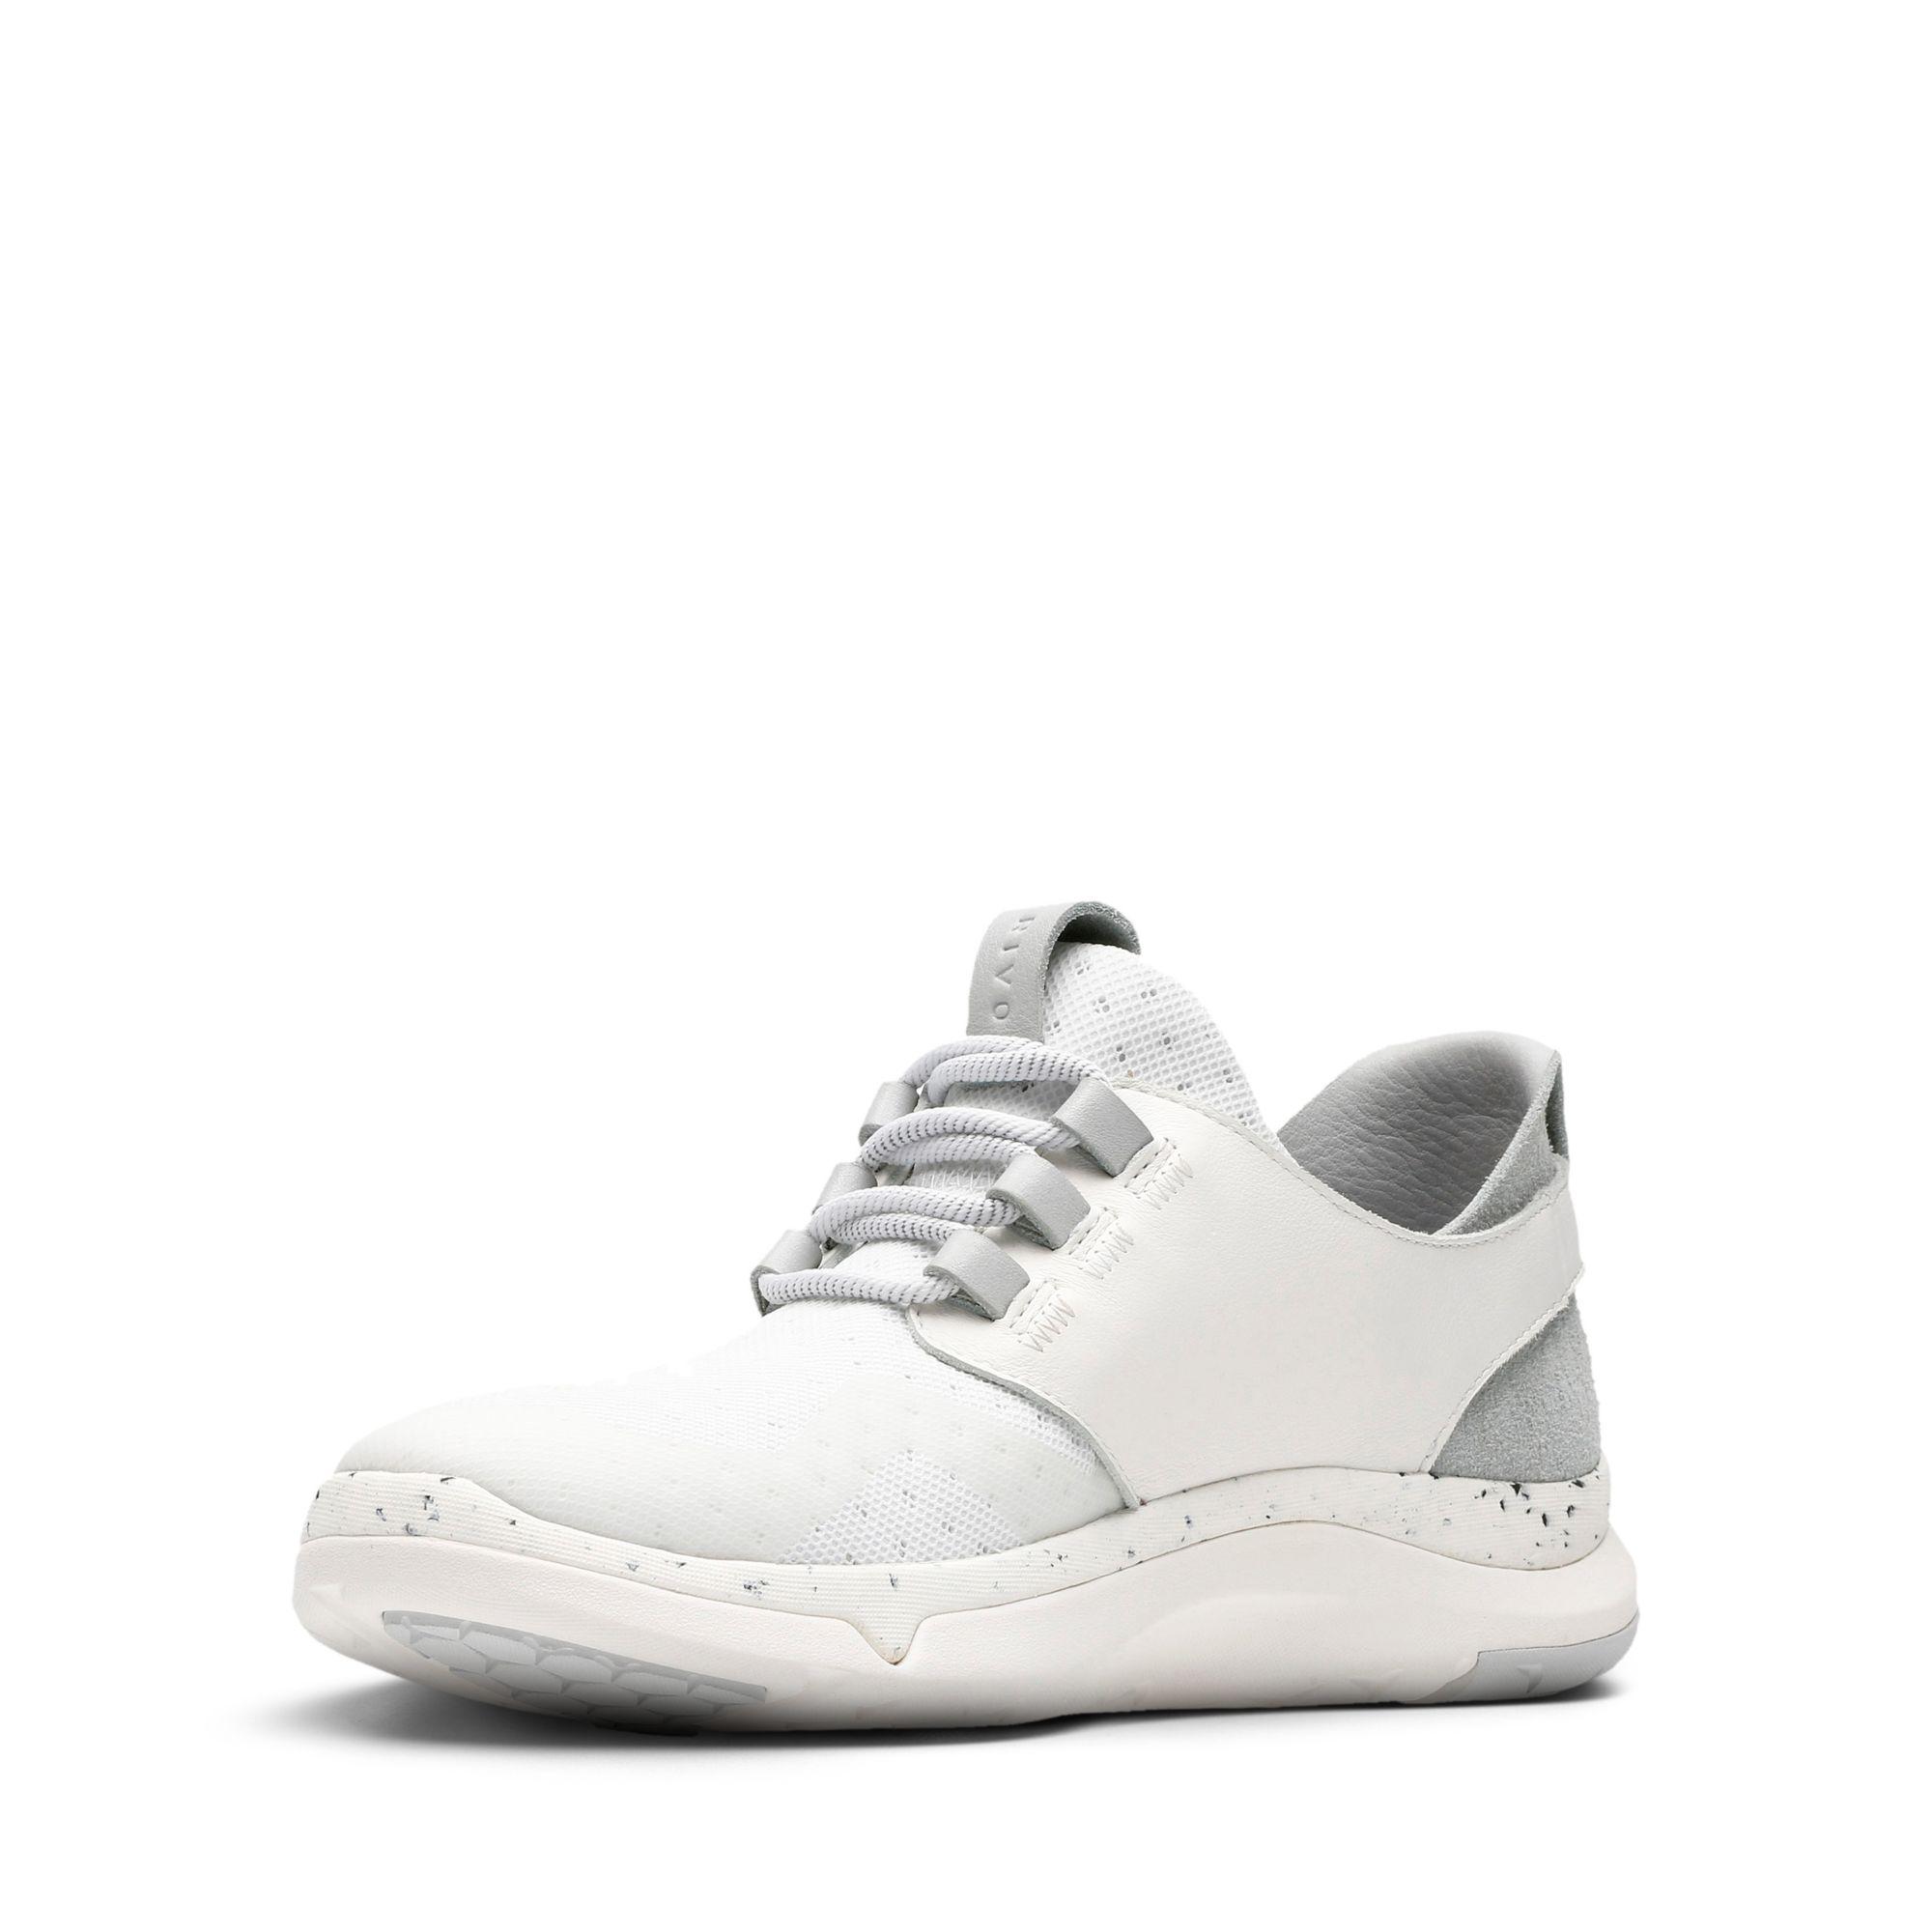 Clarks Leather Privo Motion in White/Grey (White) for Men - Lyst